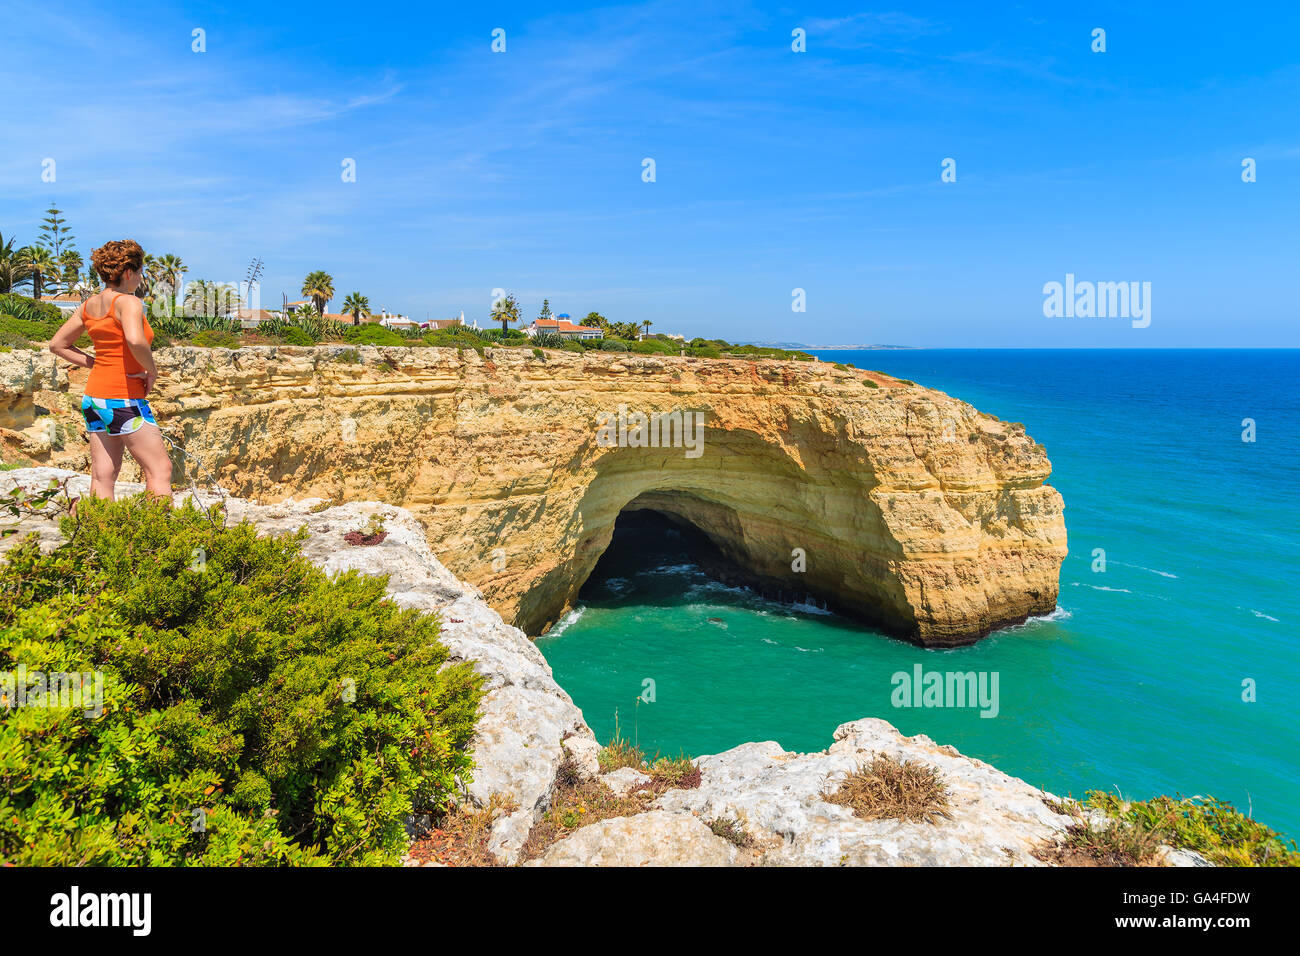 Young woman tourist standing on cliff rock and looking at sea cave on coast of Portugal, Algarve region Stock Photo